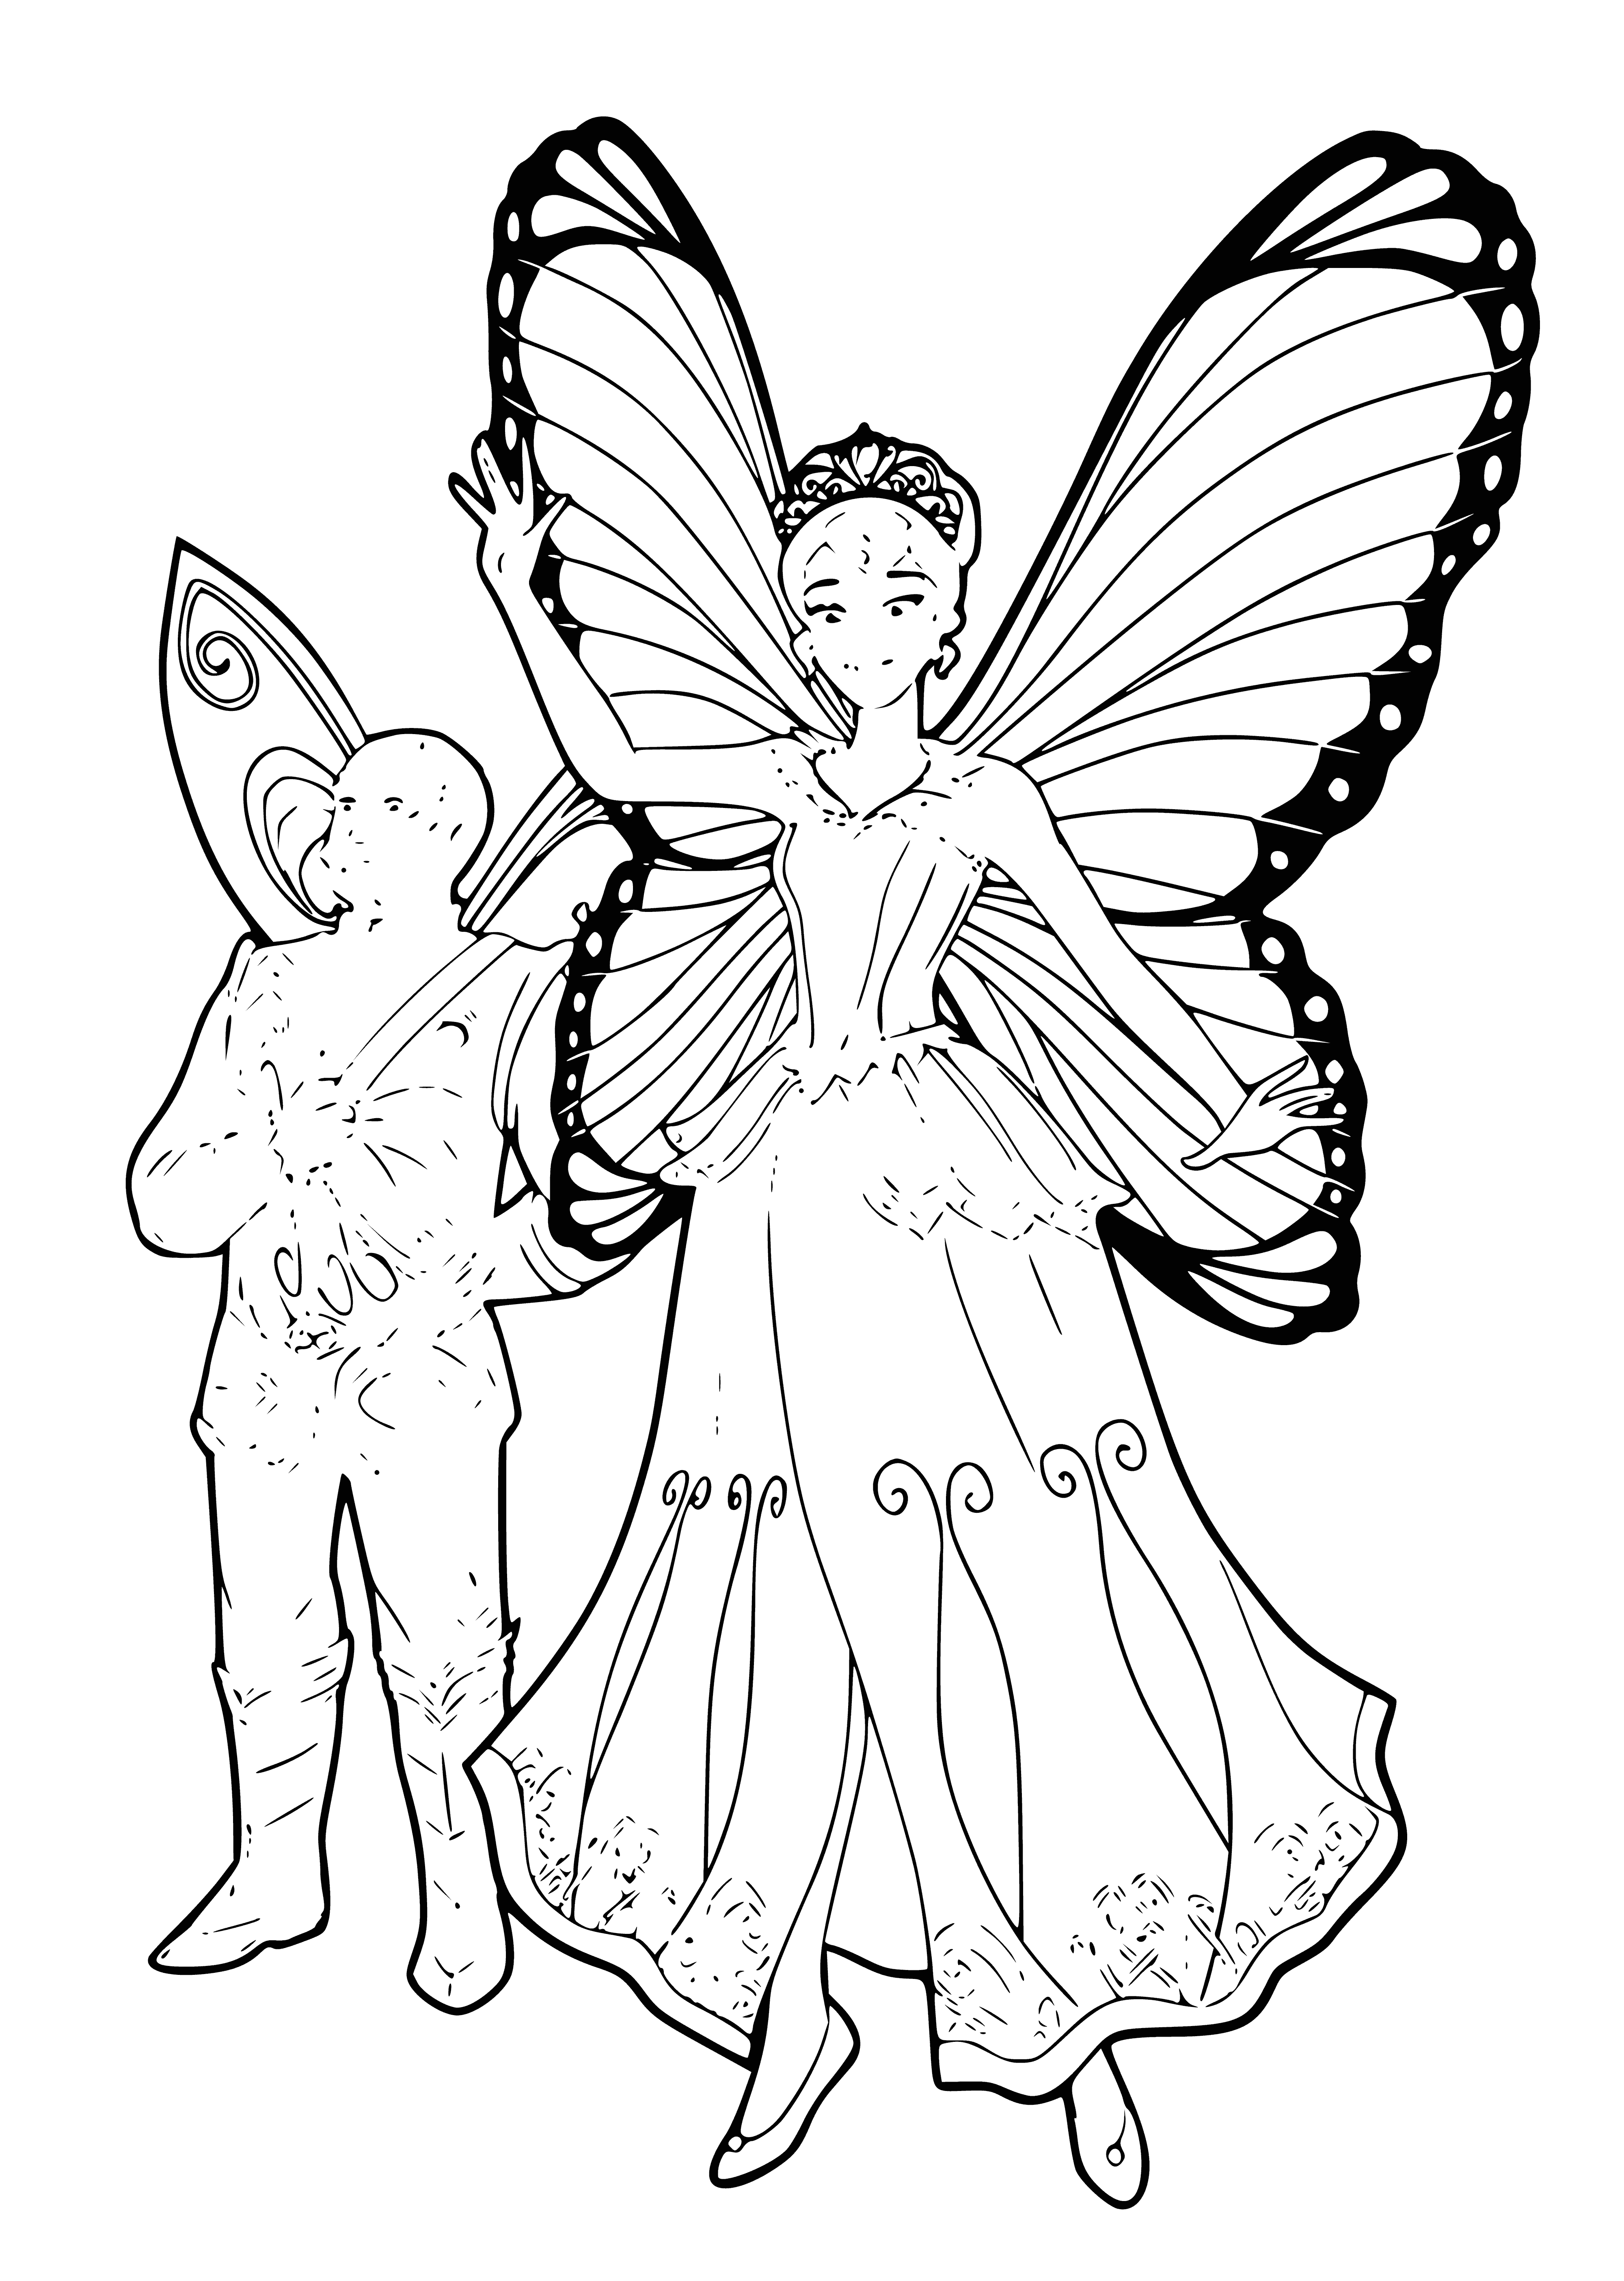 coloring page: Barbie-Babri Queen w/ blonde side-pony, blue eyes, pink dress & wings. A vision of pink beauty!